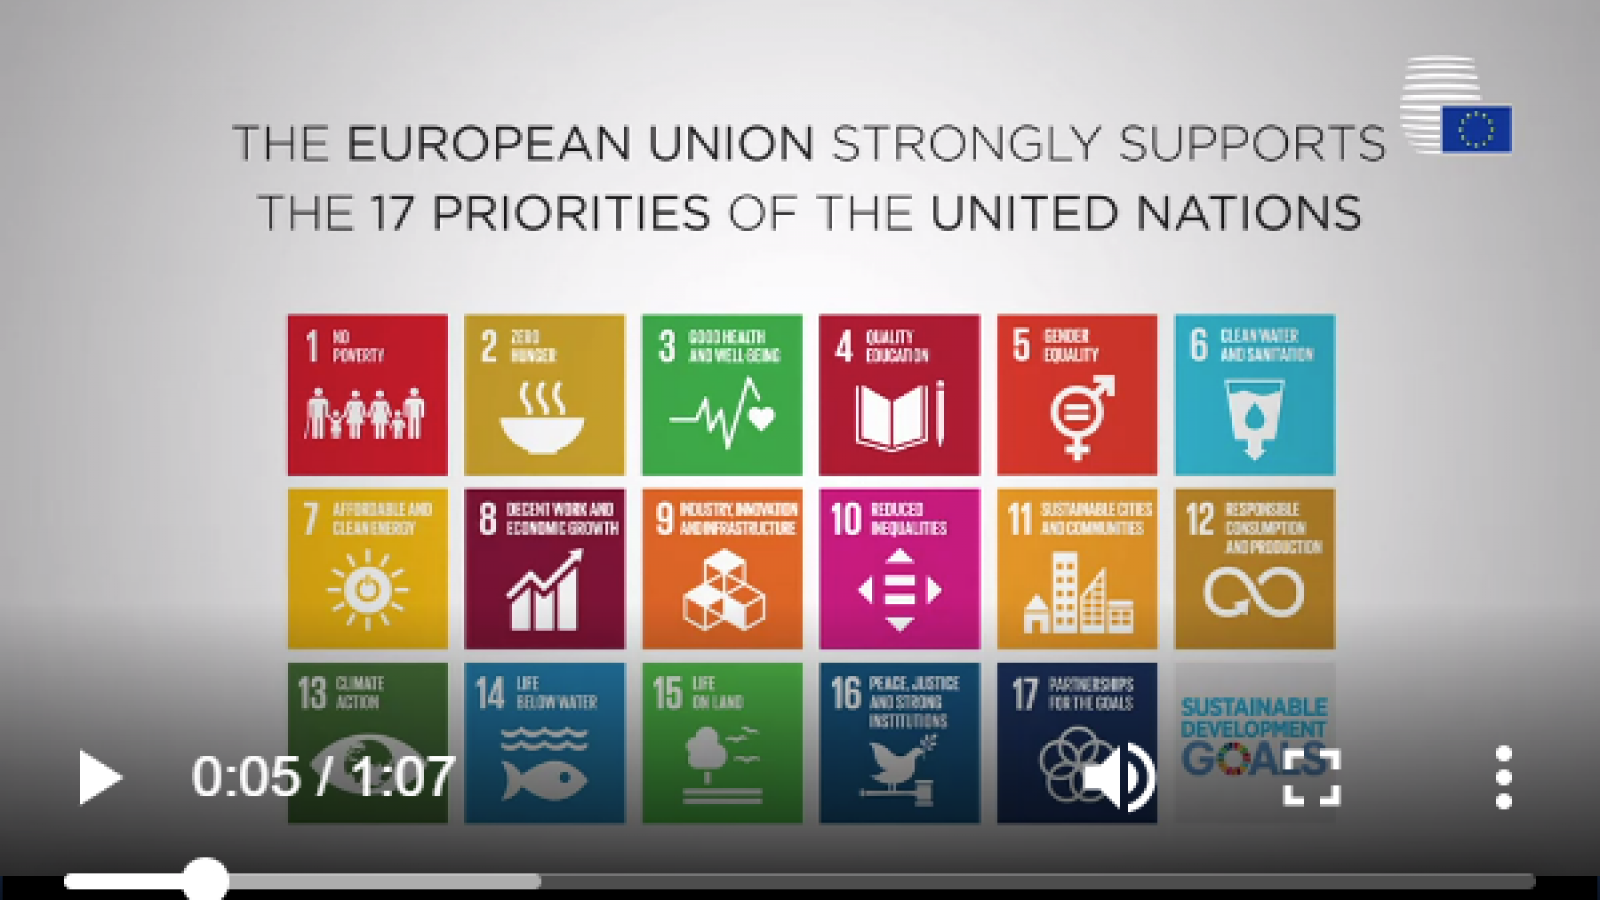 Sustainable development: The Council of the European Union adopts conclusions